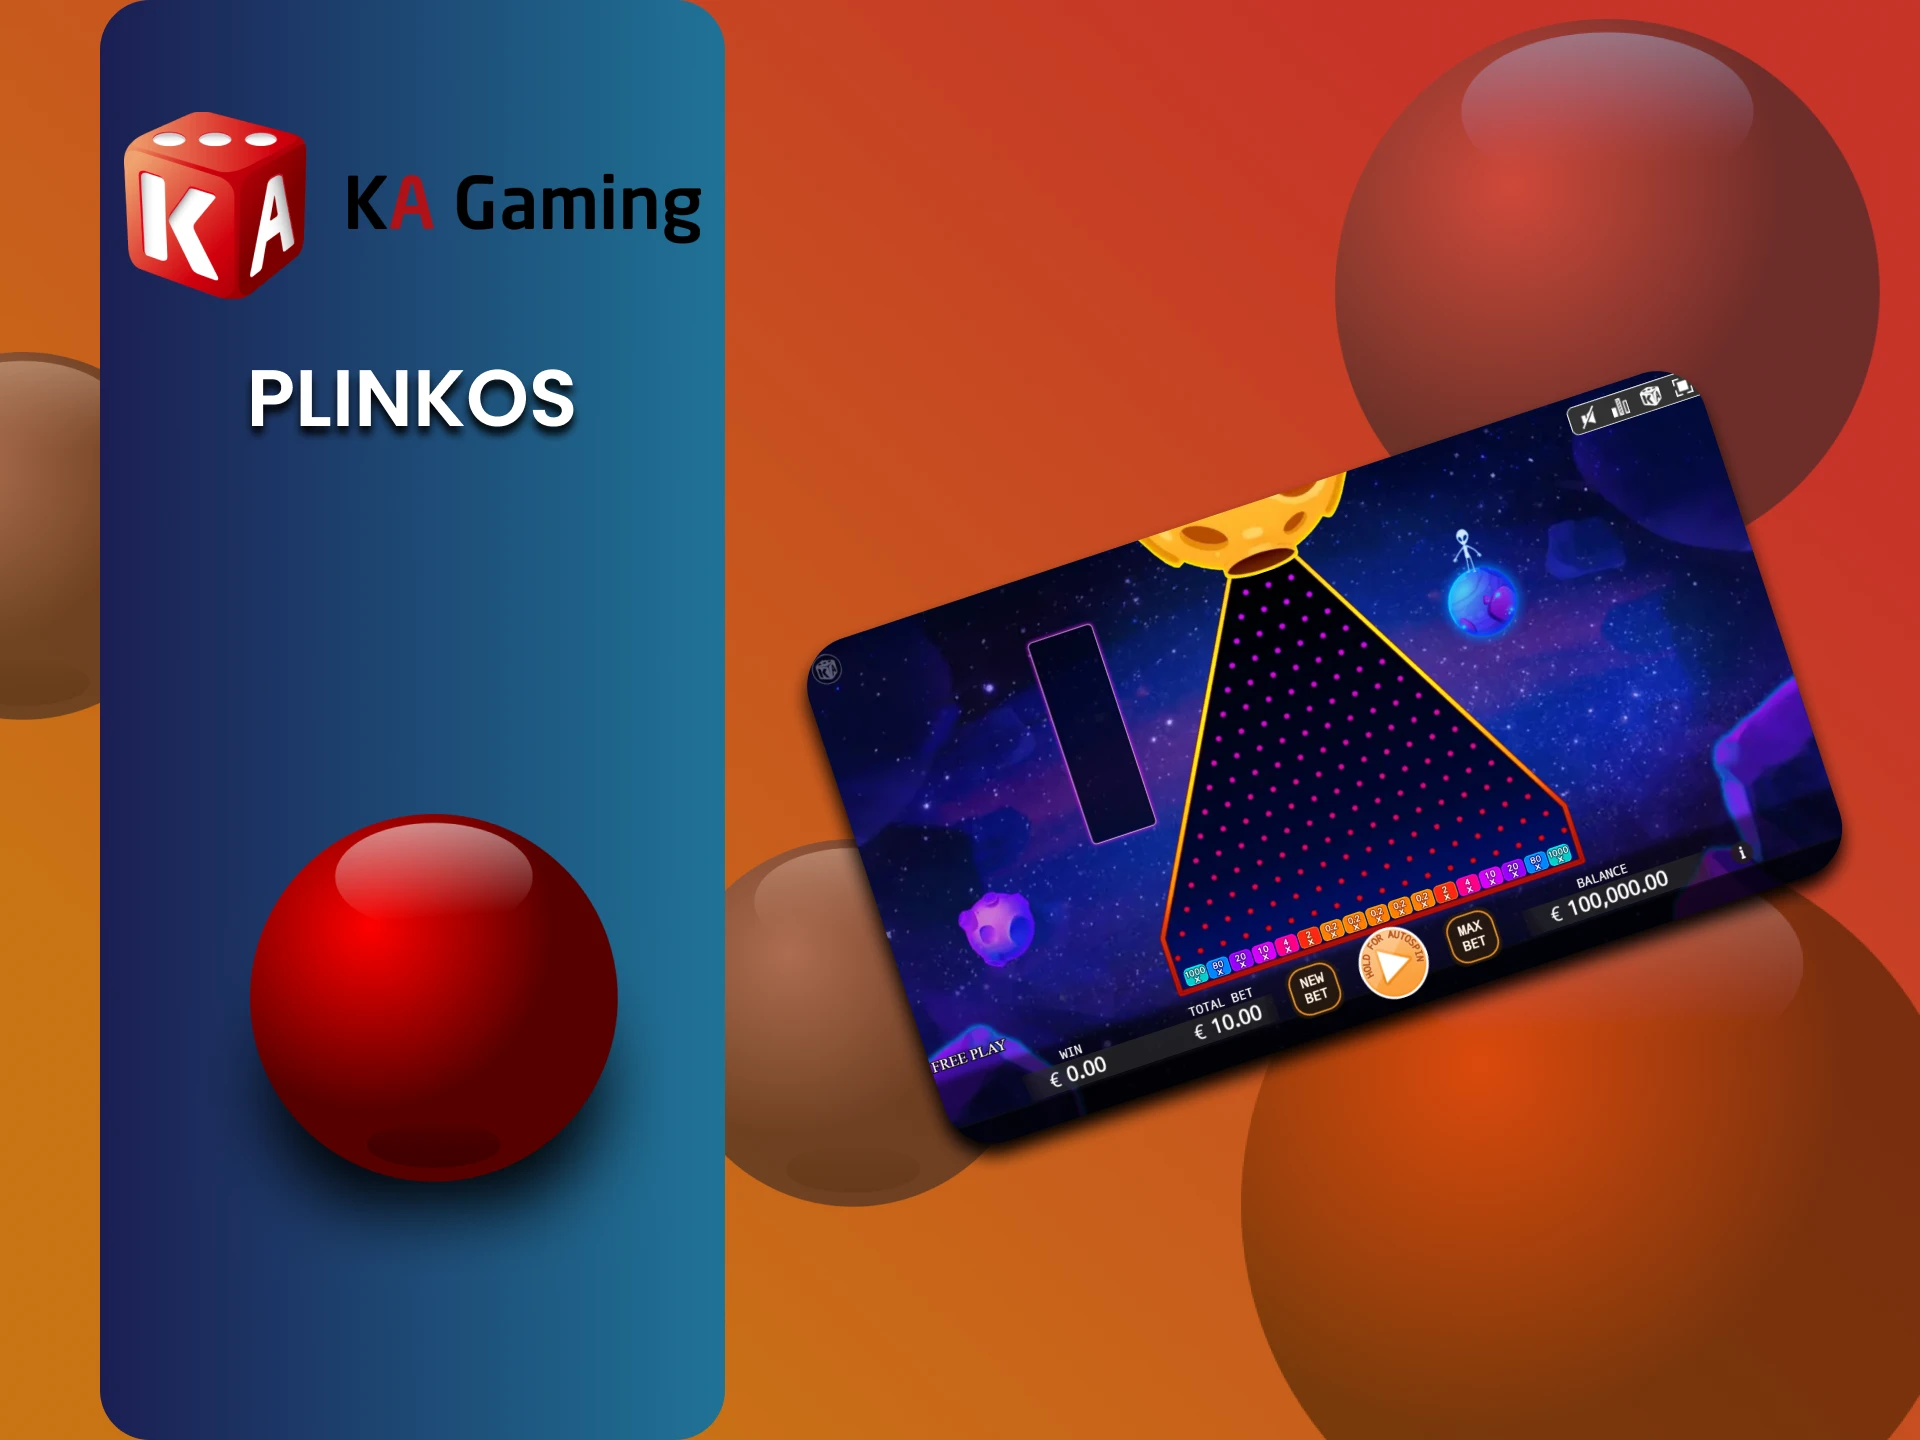 We will talk about the game Plinko from KA Gaming.